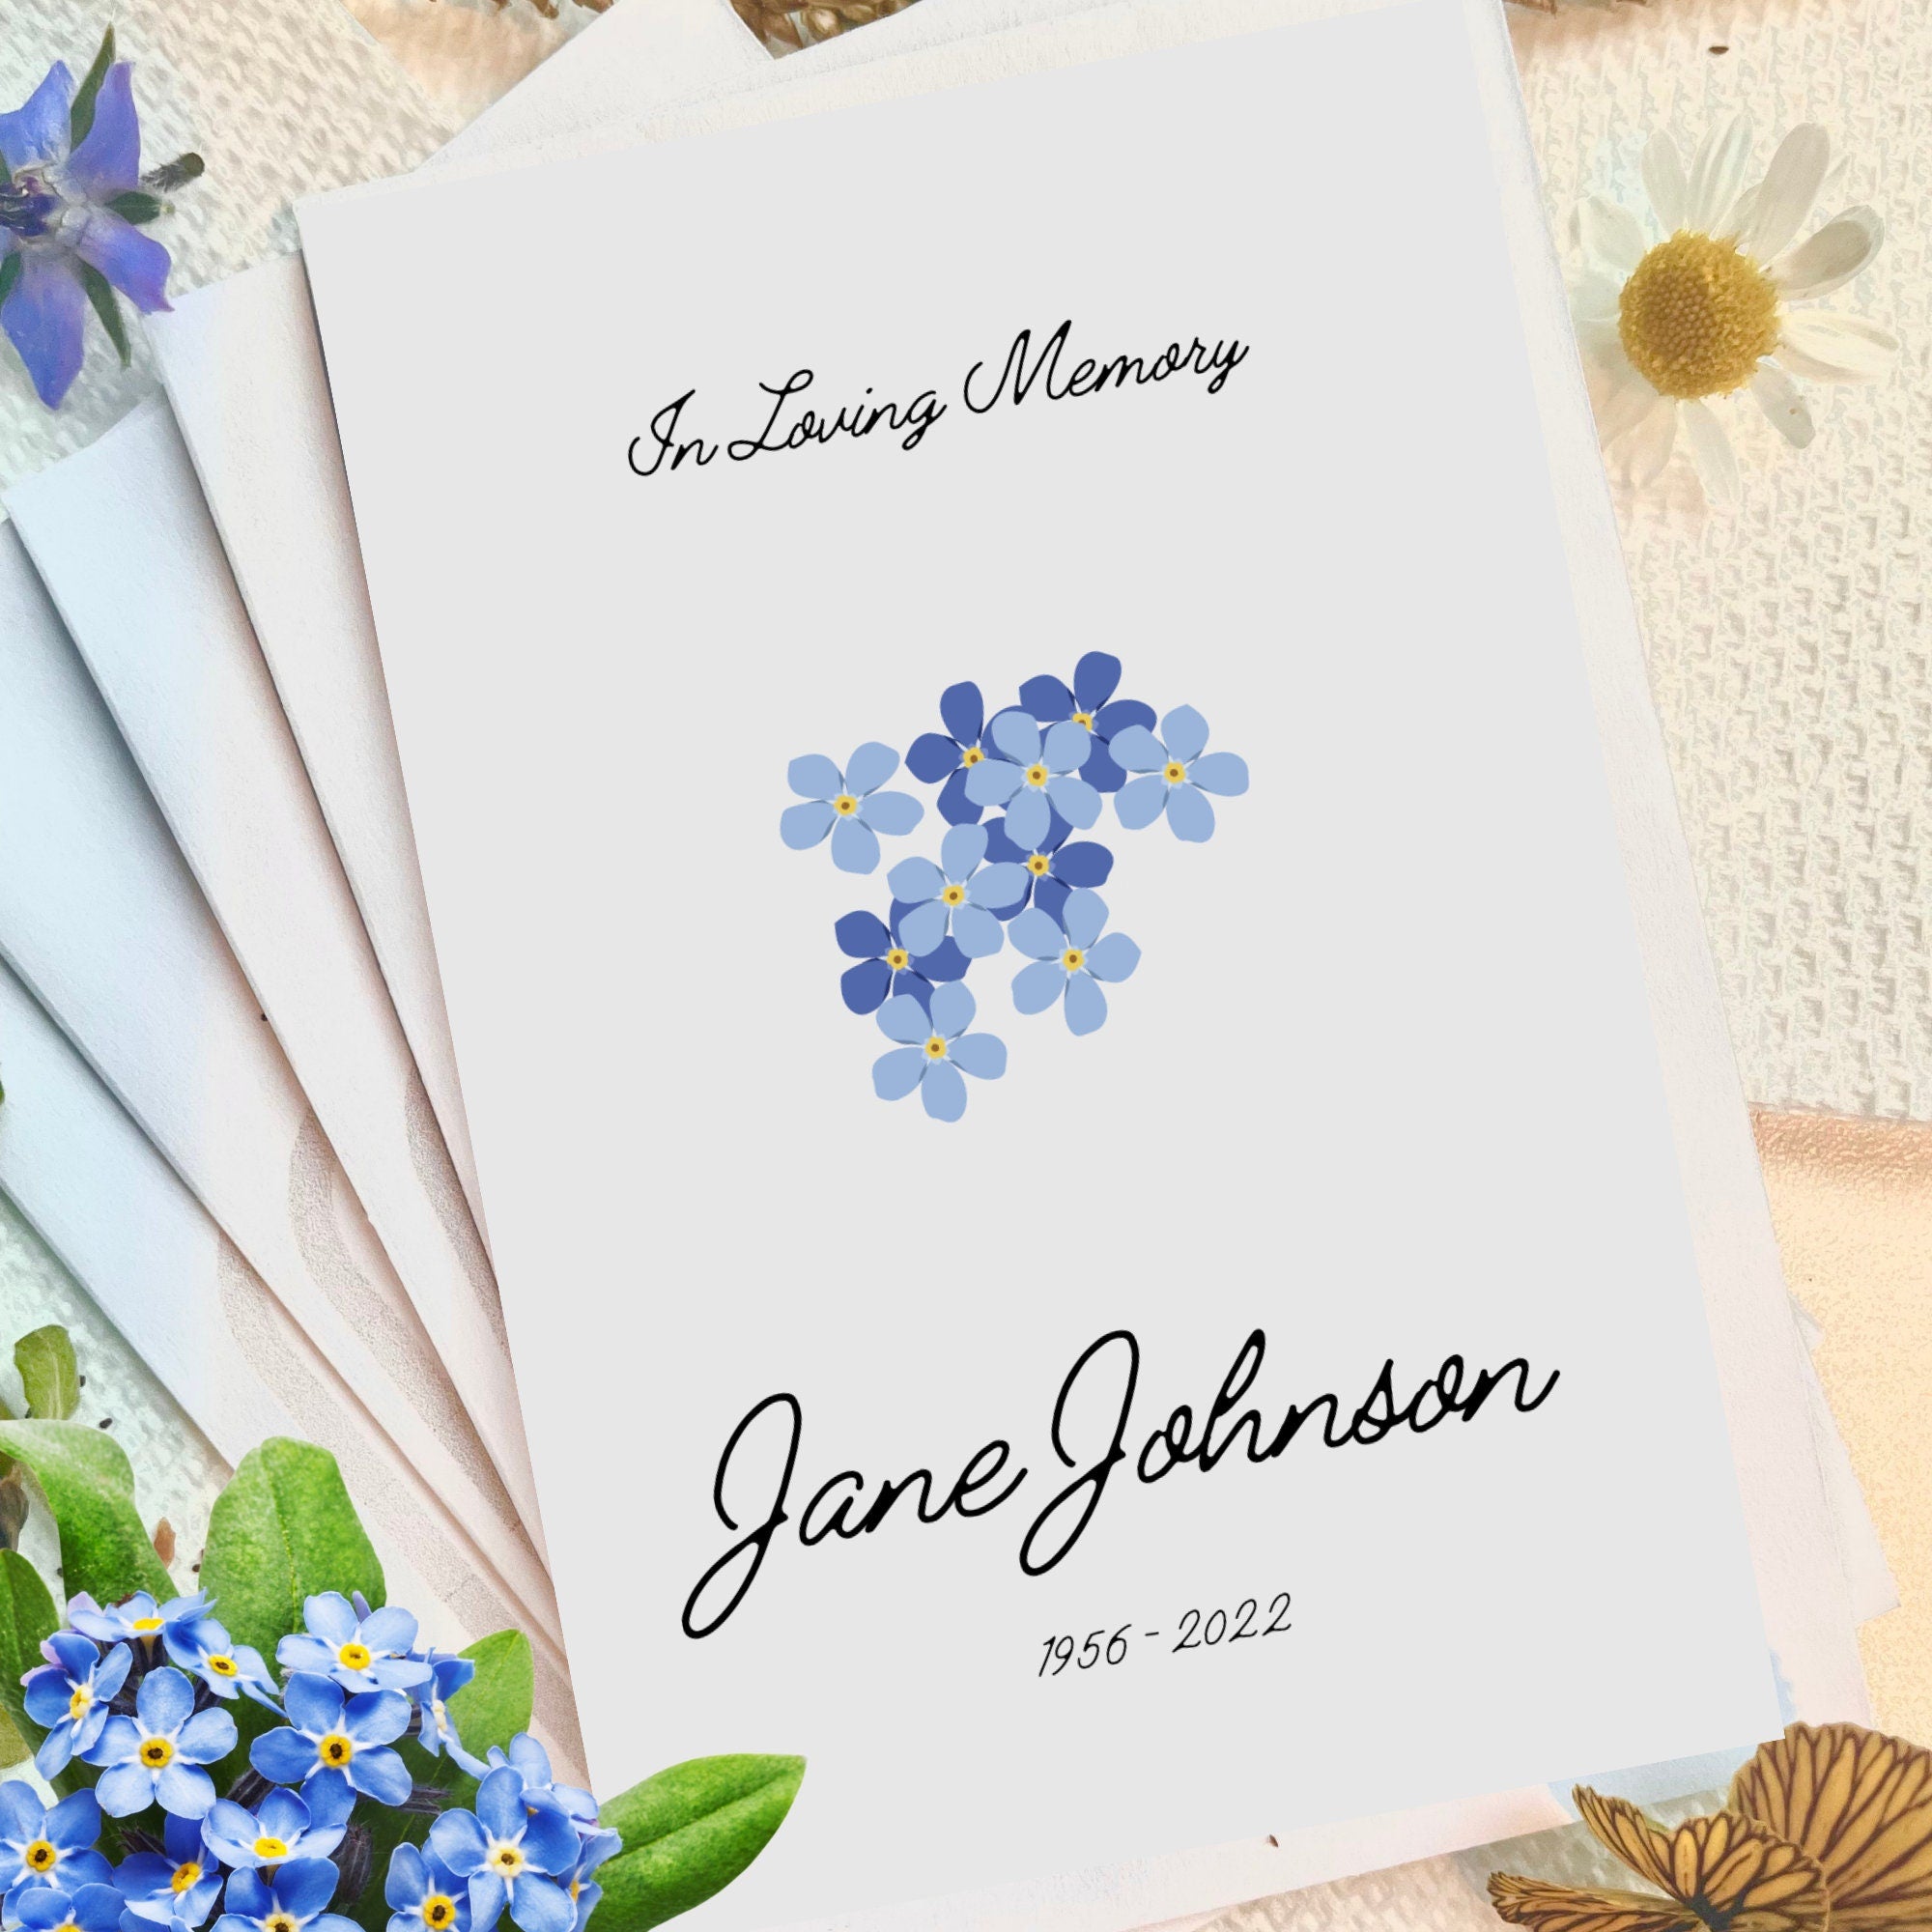 Personalized Celebration of Life Forget Me Not Seed Packages